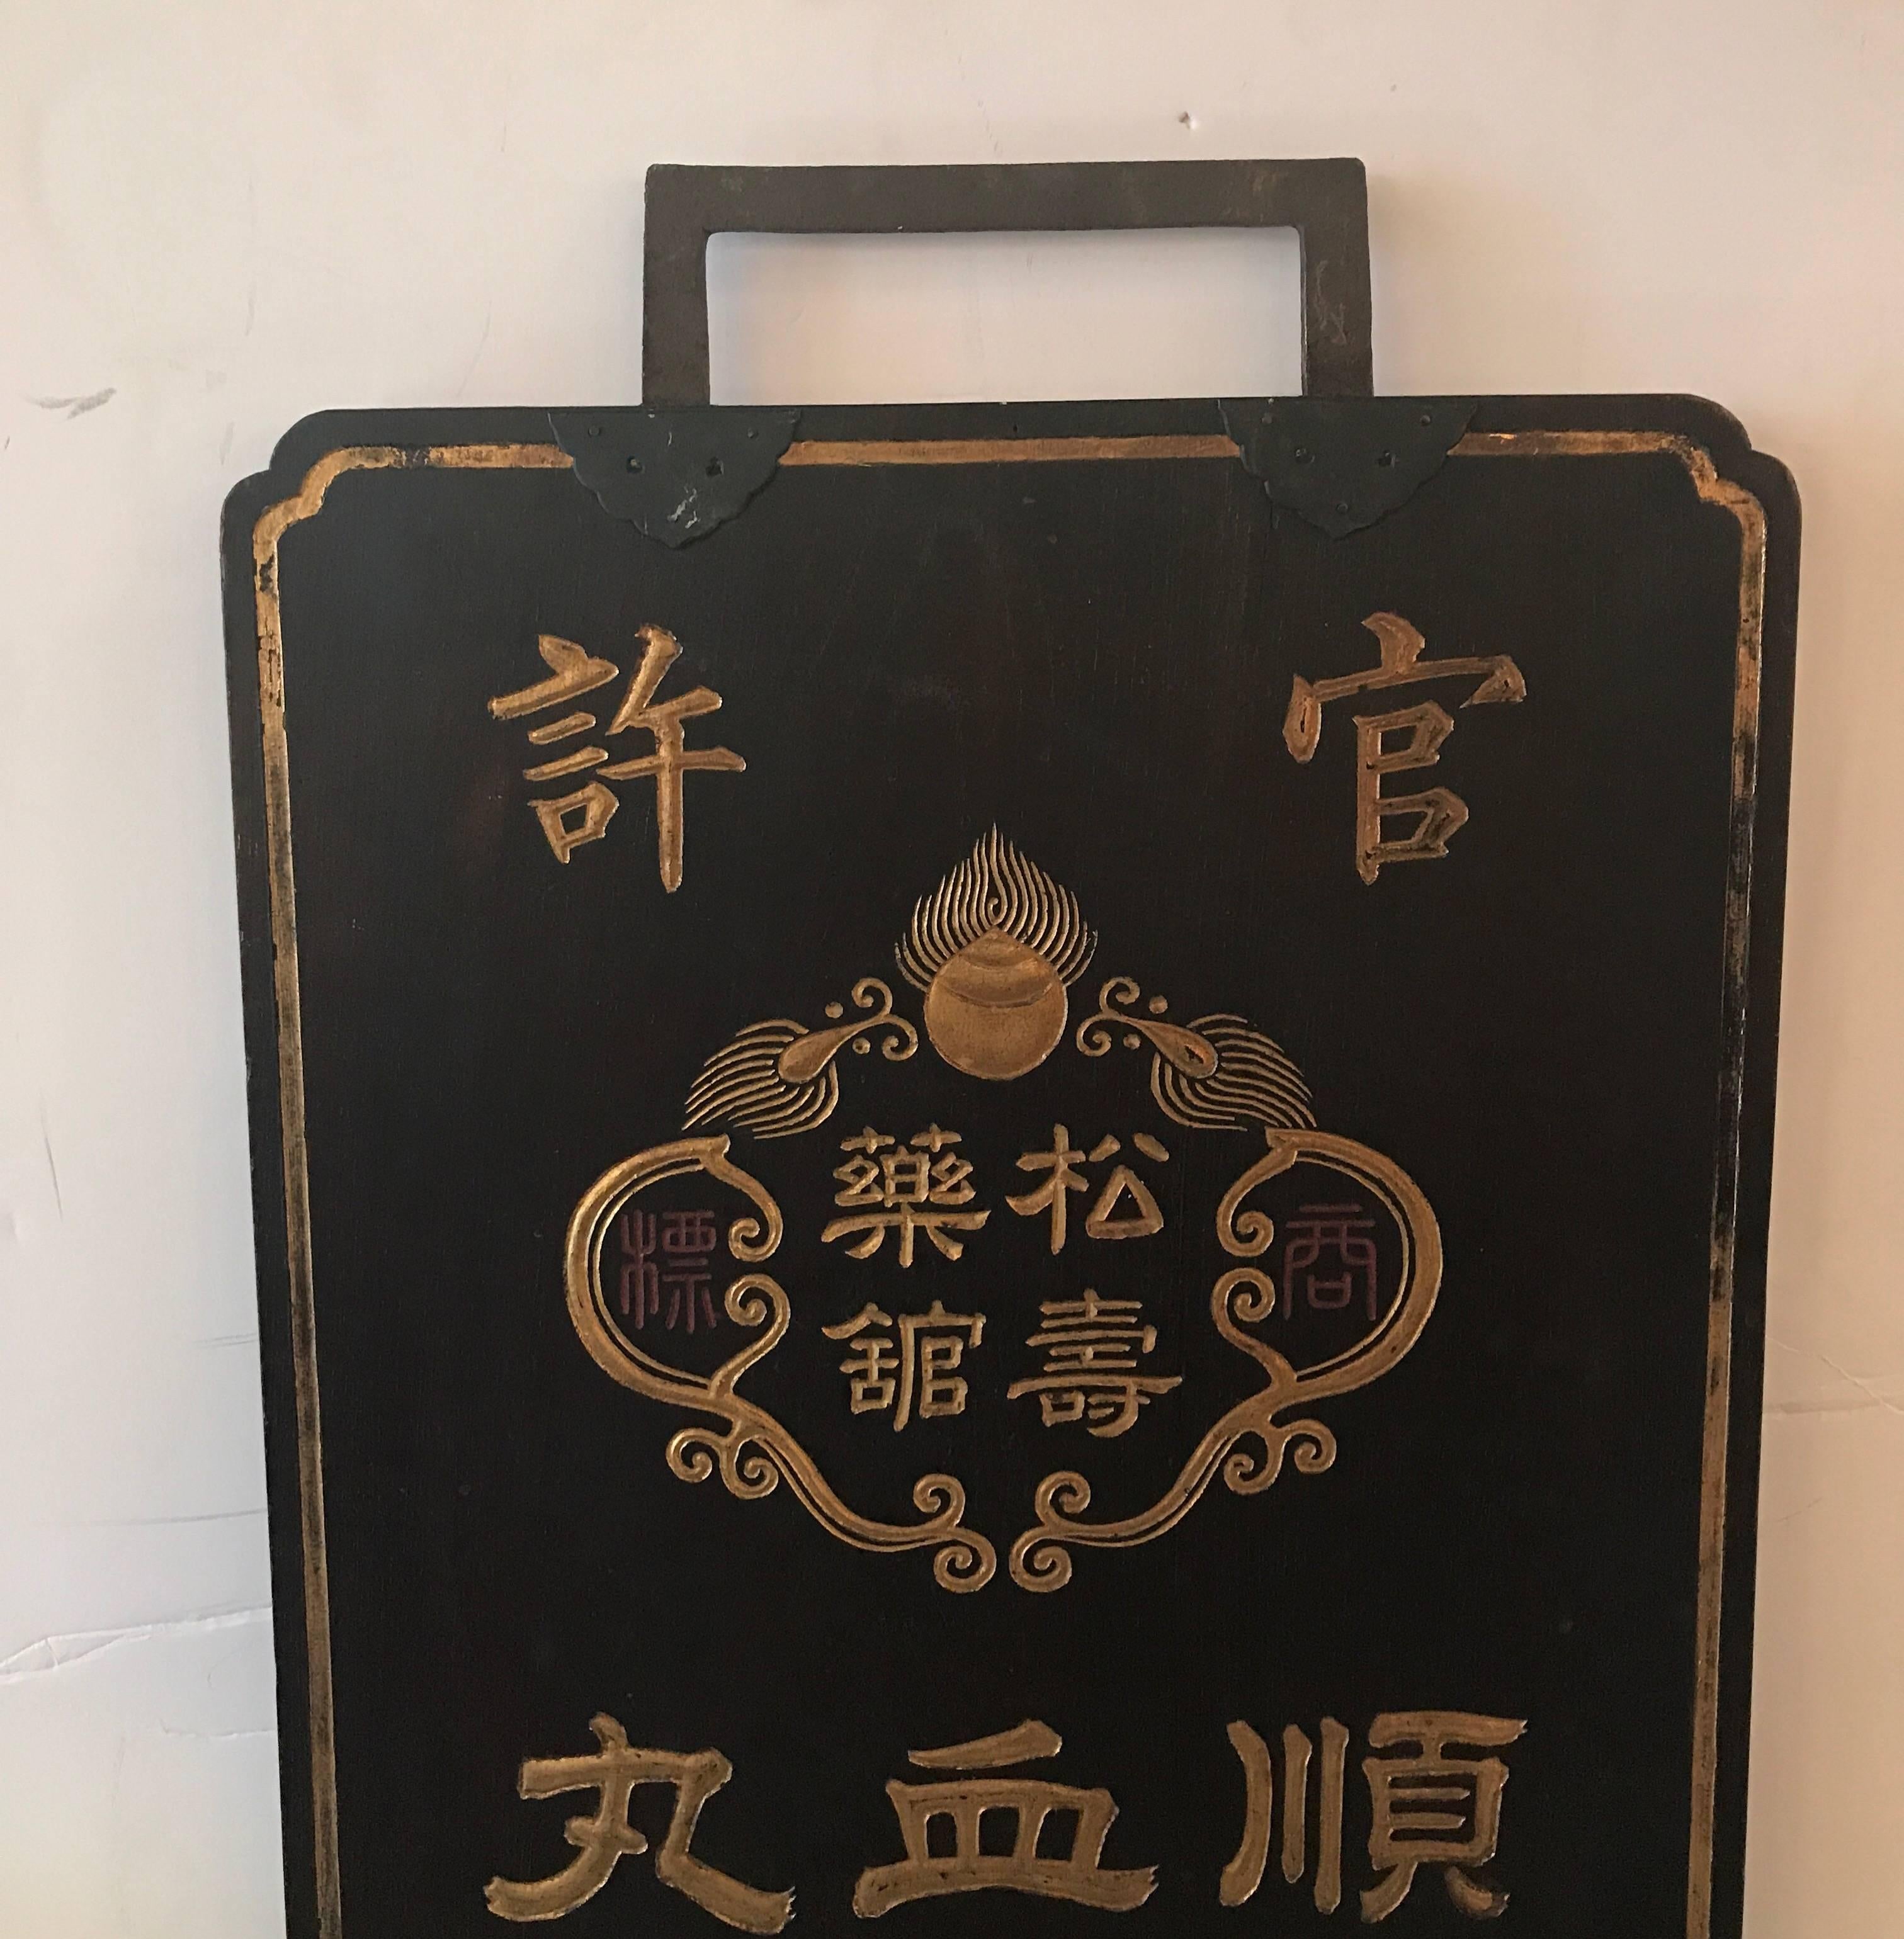 A hand-carved and painted double-sided Japanese wood trade sign. Solid wood panel with carved and gilt lettering with hand-forged iron mounts at the top.